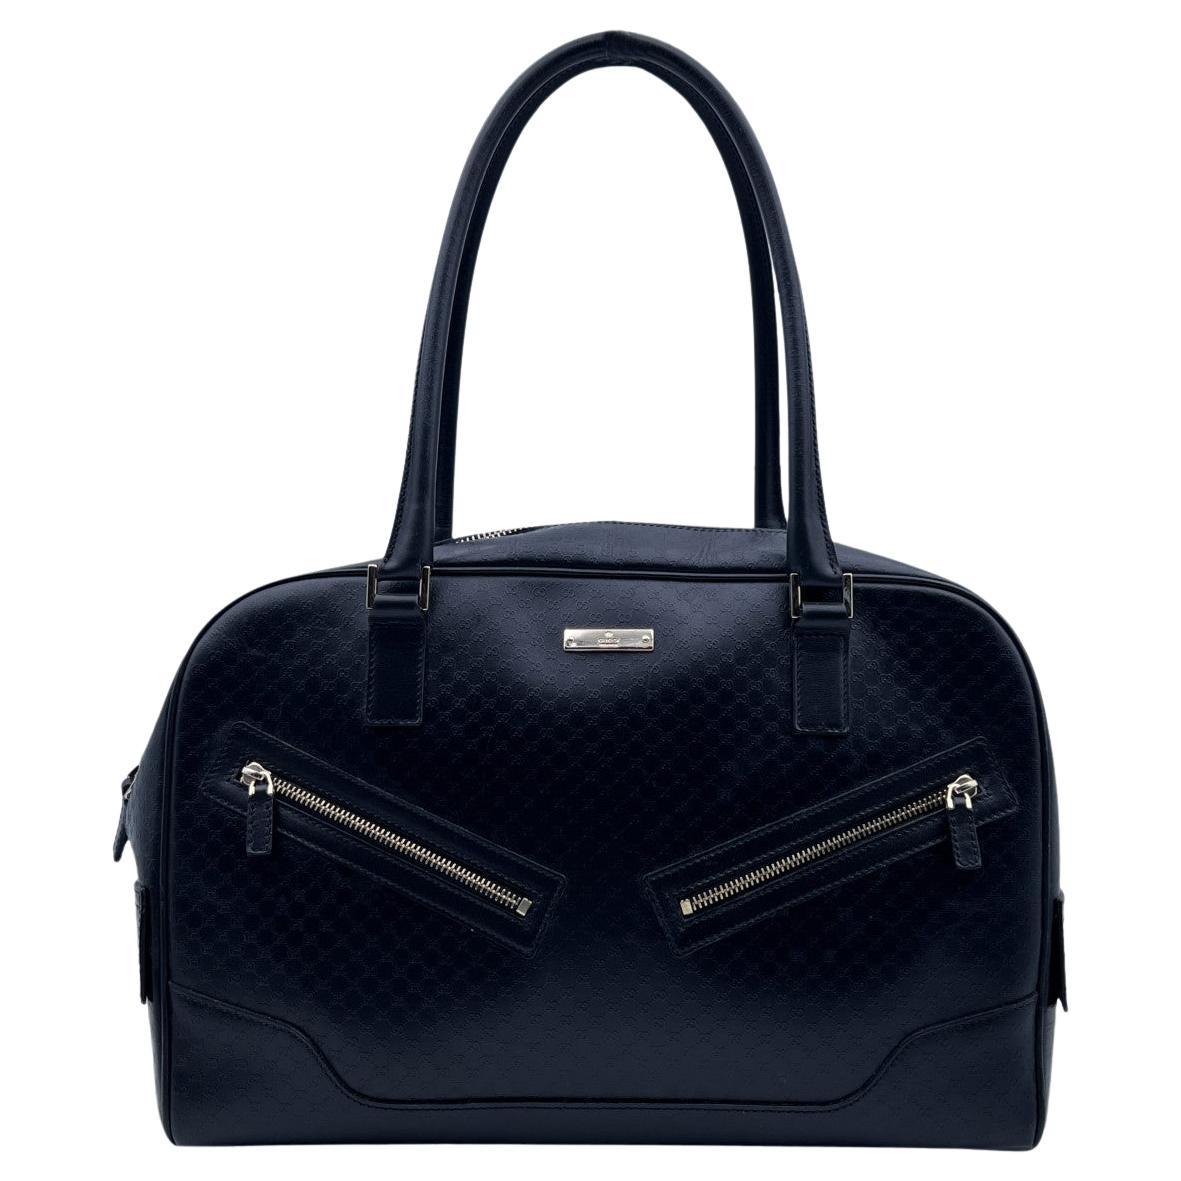 Gucci Black Leather Microguccissima Leather Satchel Bowler Bag